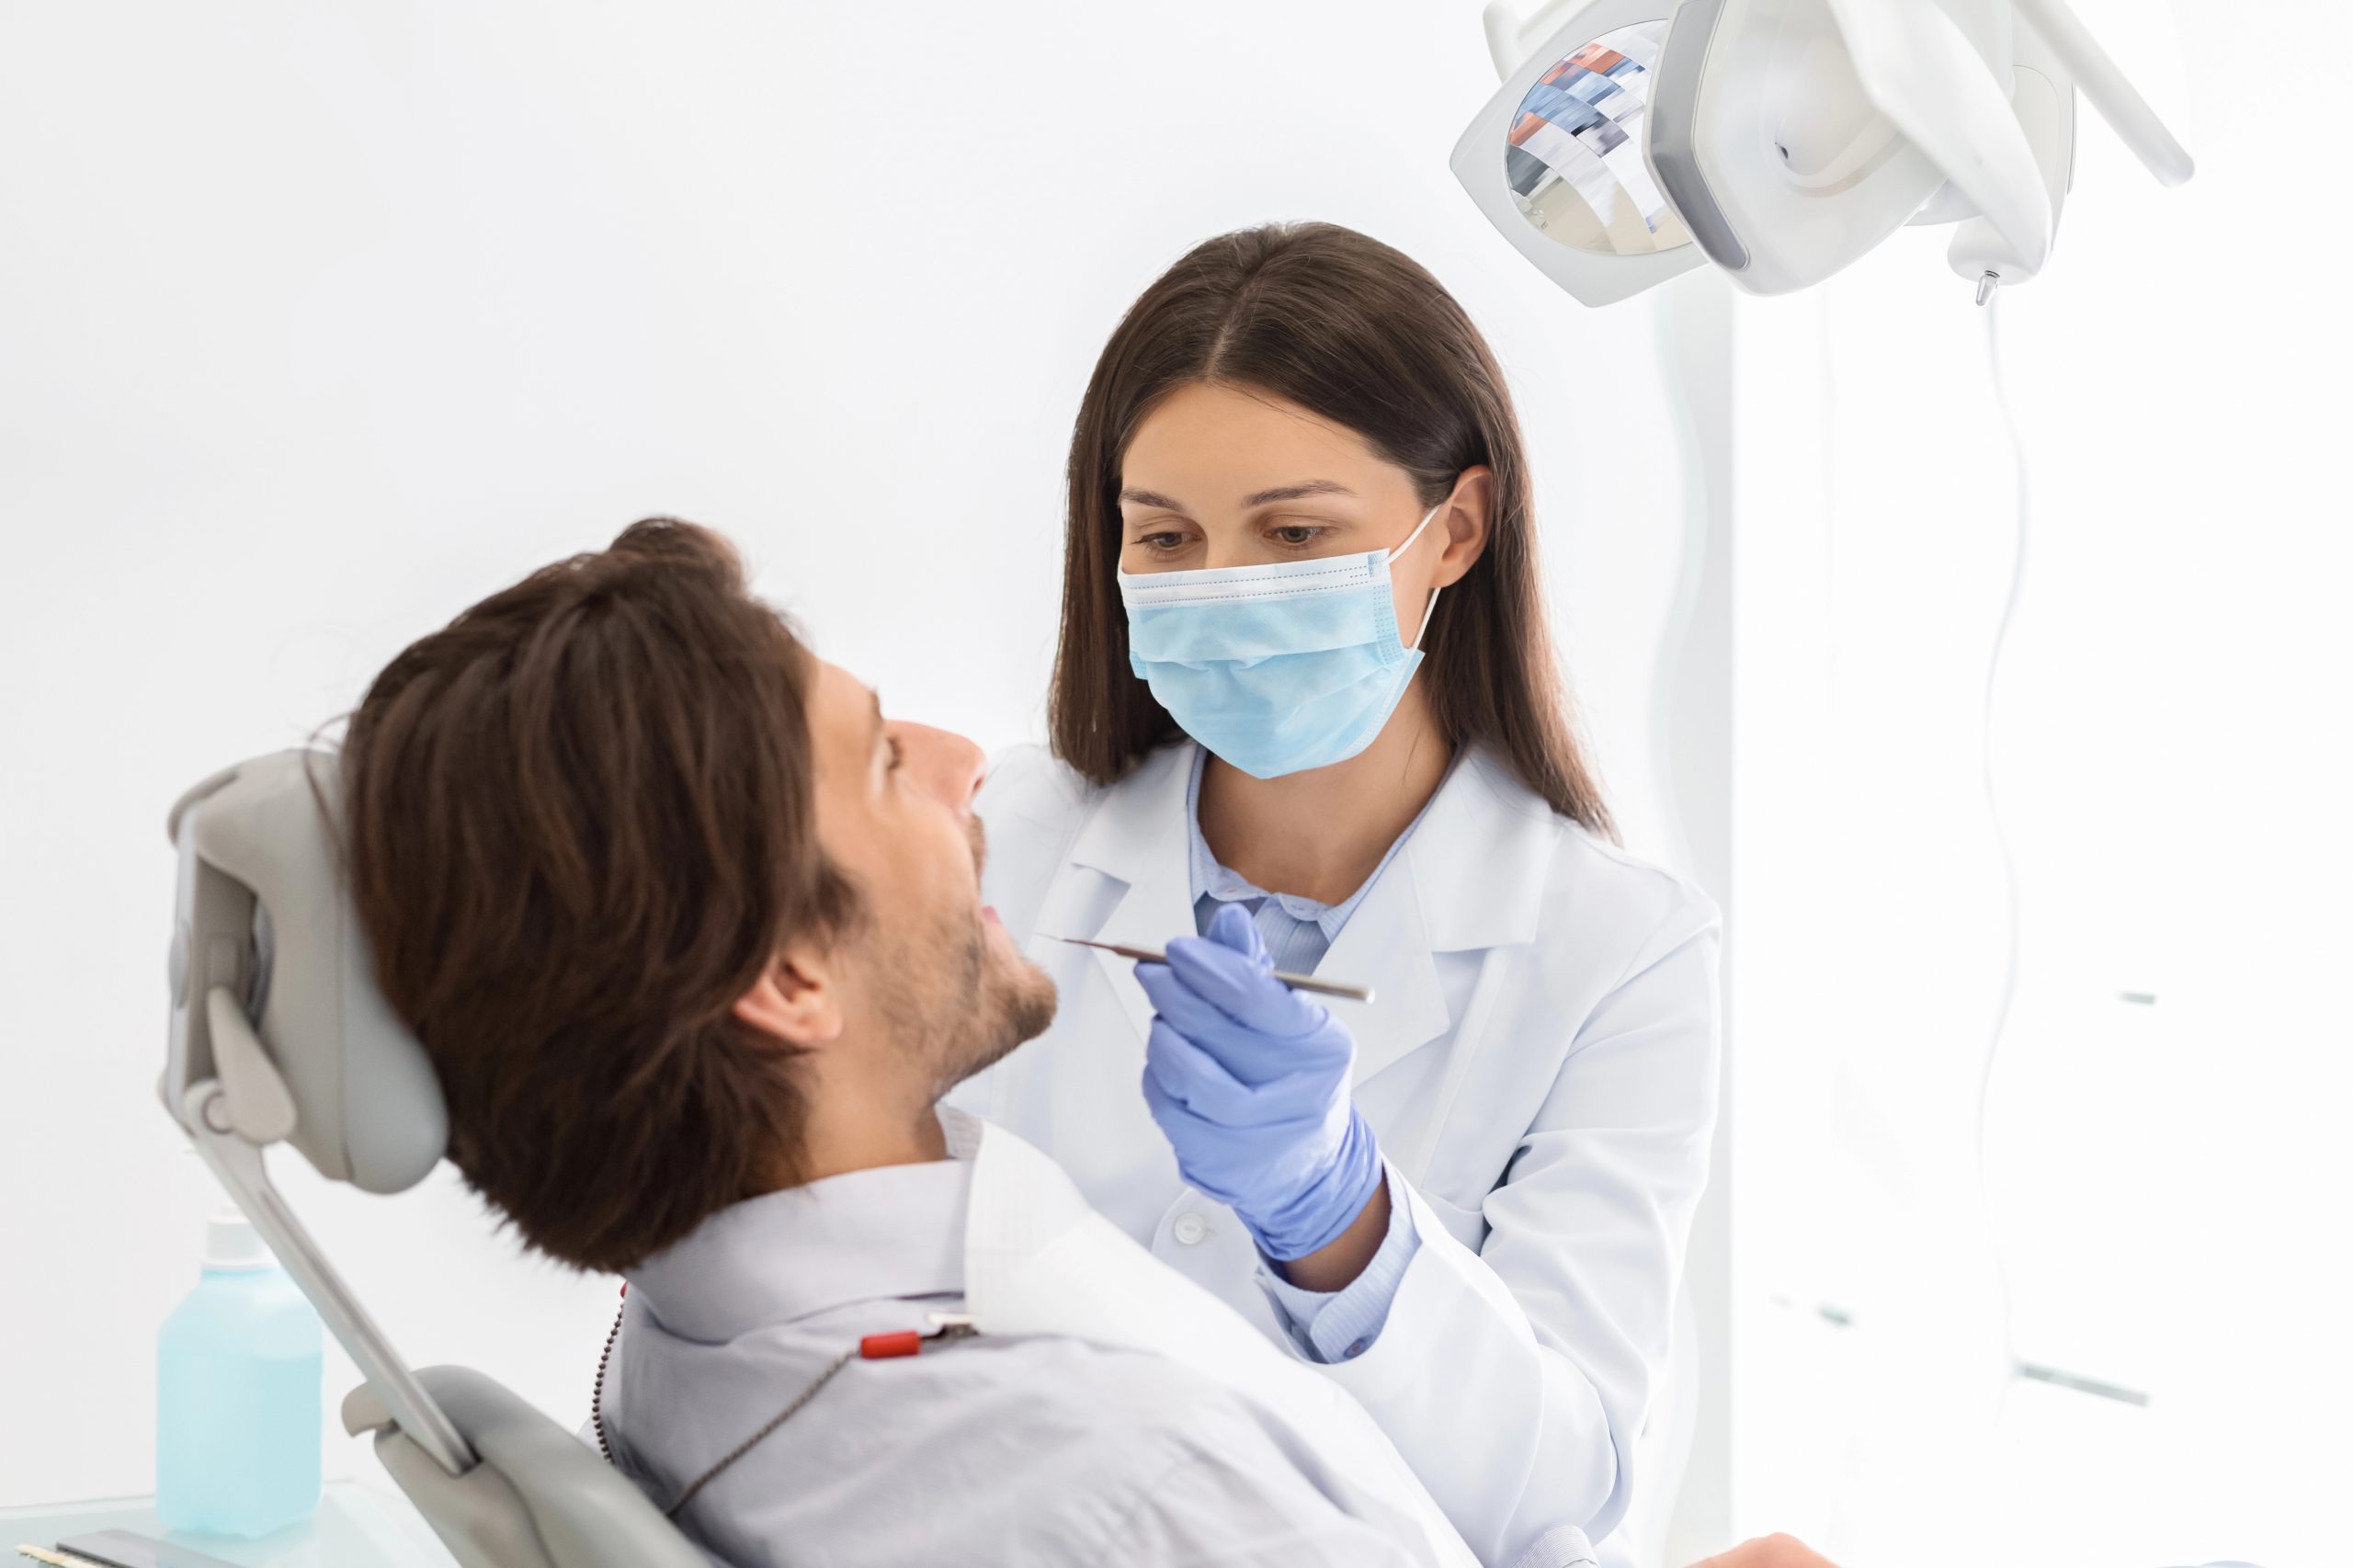 Root Canal Infection: Symptoms, Treatment, and Prevention